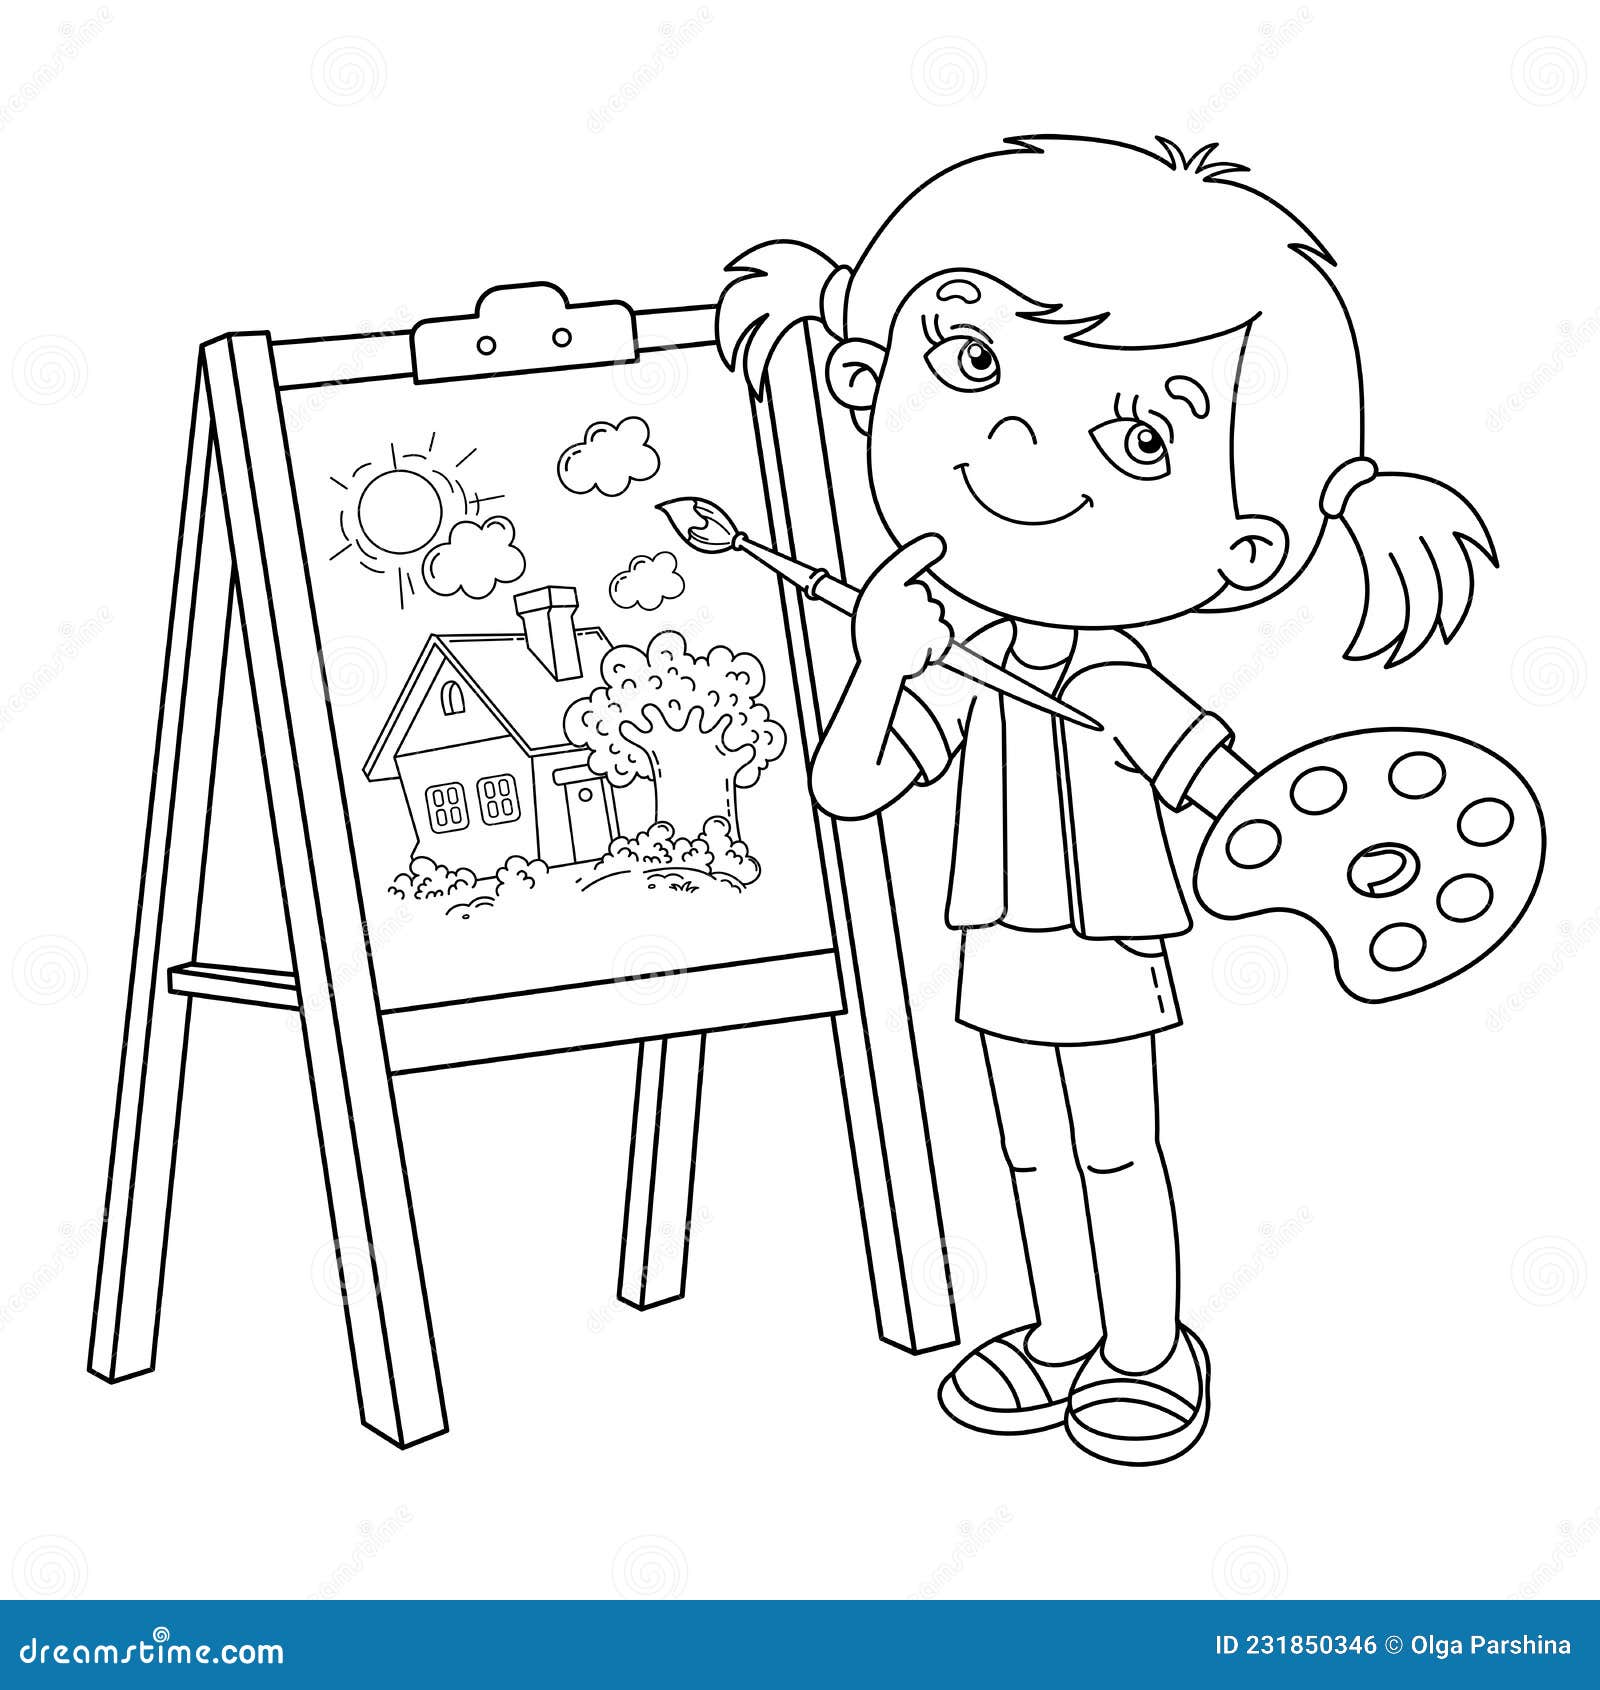 https://thumbs.dreamstime.com/z/coloring-page-outline-cartoon-girl-brush-paints-little-artist-easel-drawing-cute-house-book-kids-231850346.jpg